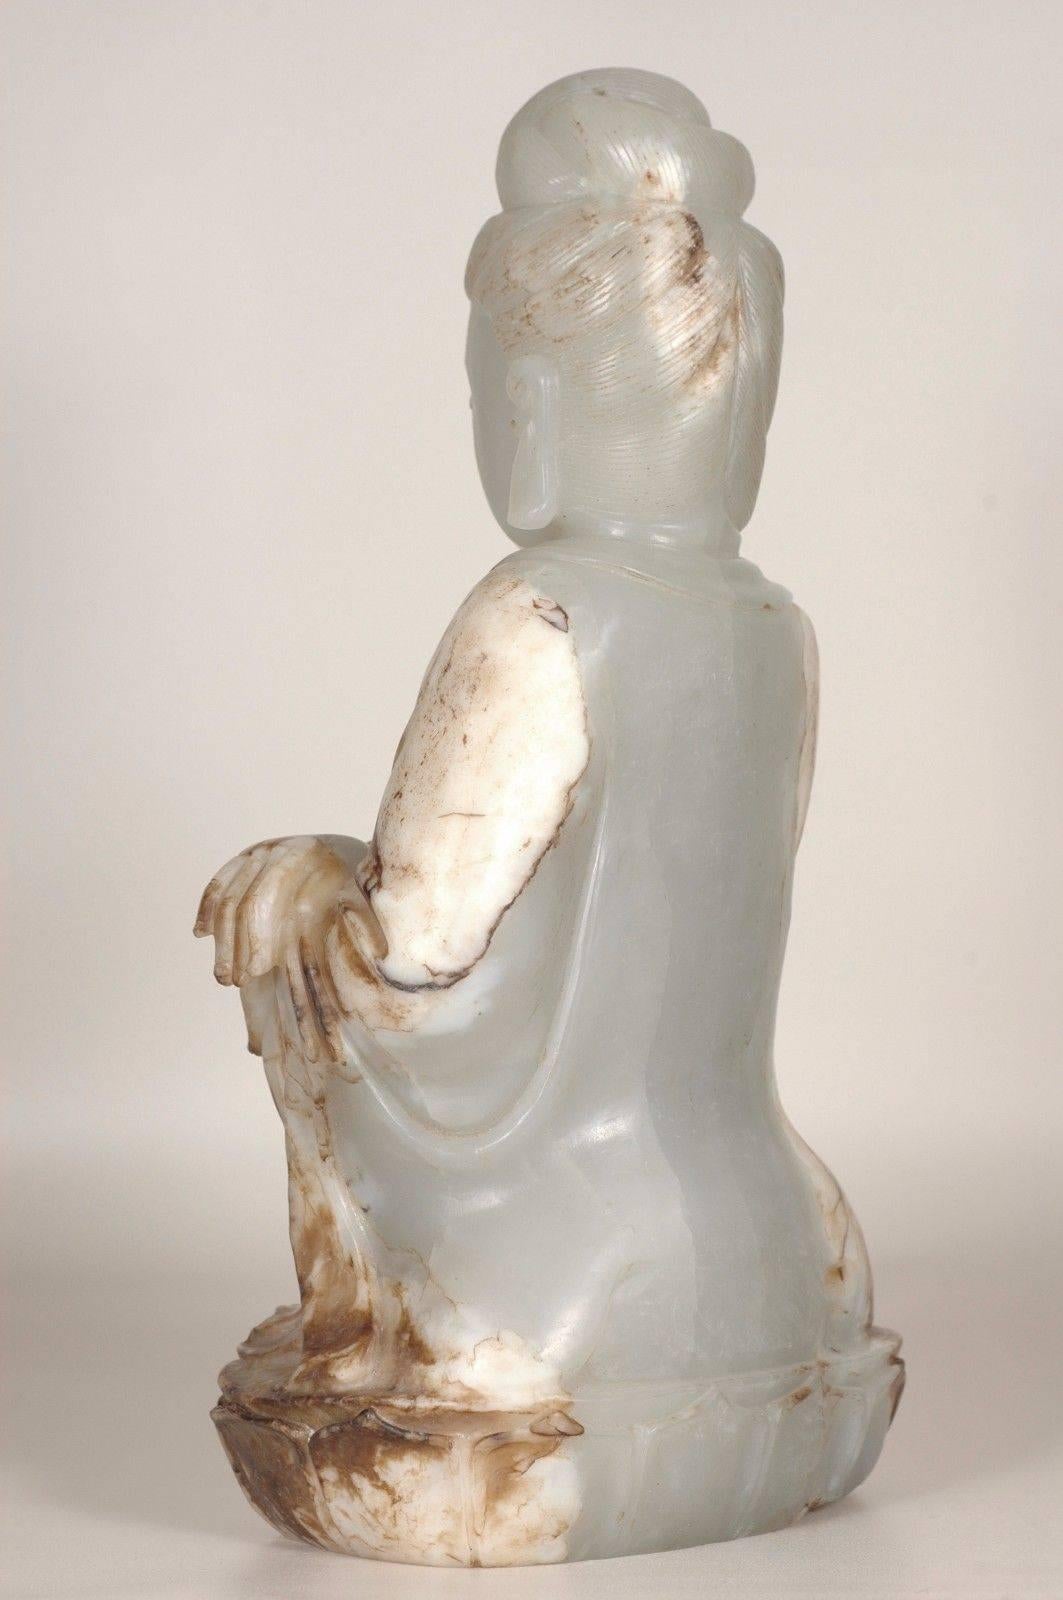 Hand-Carved Large Jade Statue of Kwan Yin, He Tian Region